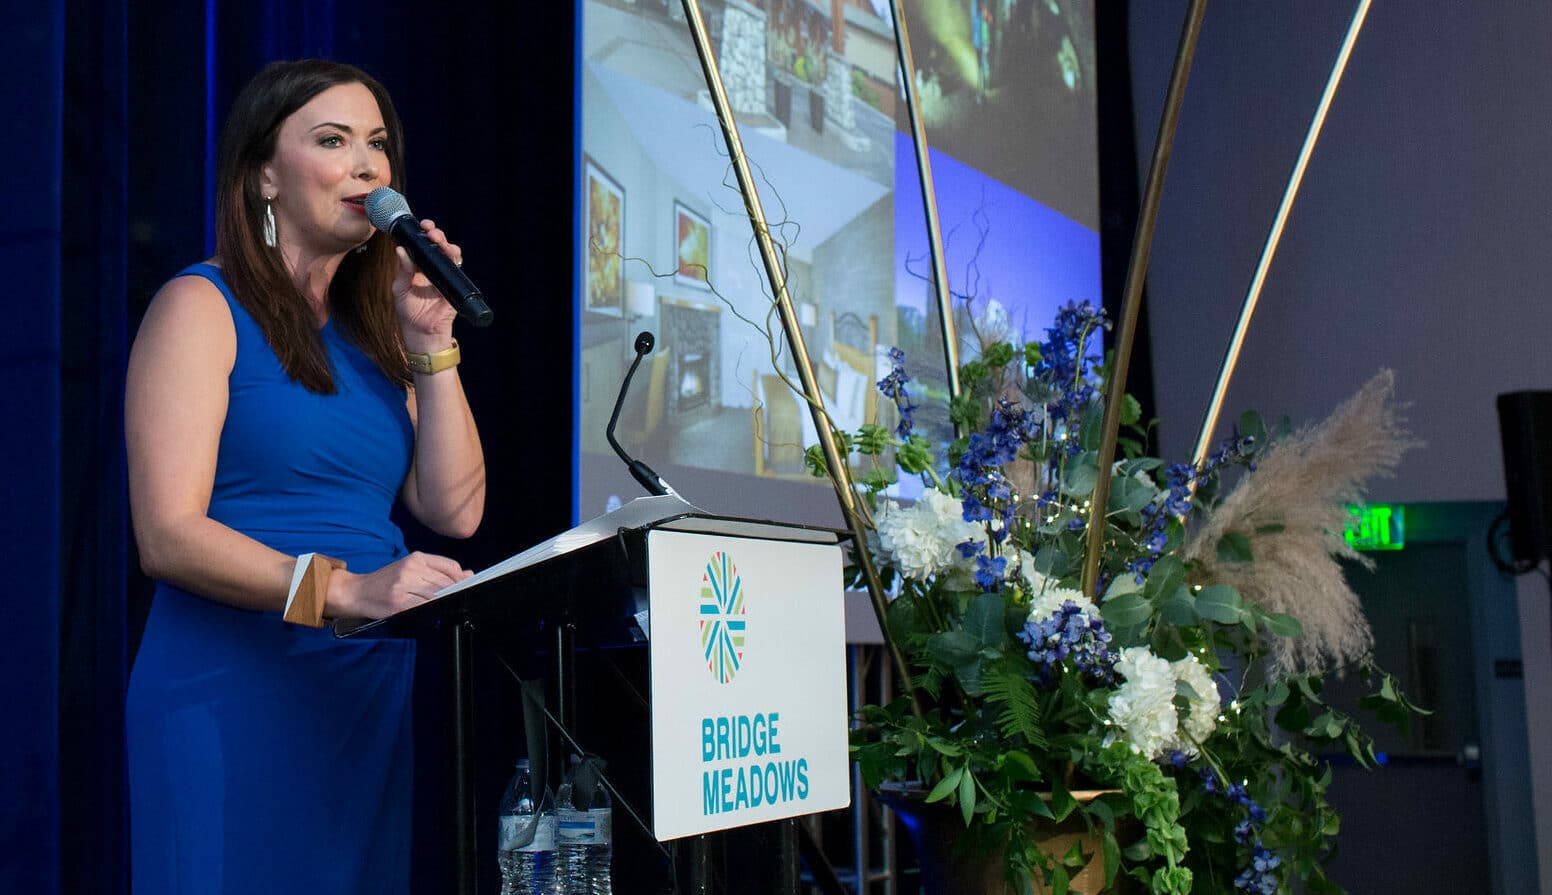 Auctioneer Johnna Wells on stage at the Bridge Meadows IMAGINE auction and gala. Credit: Paul Rich Studio